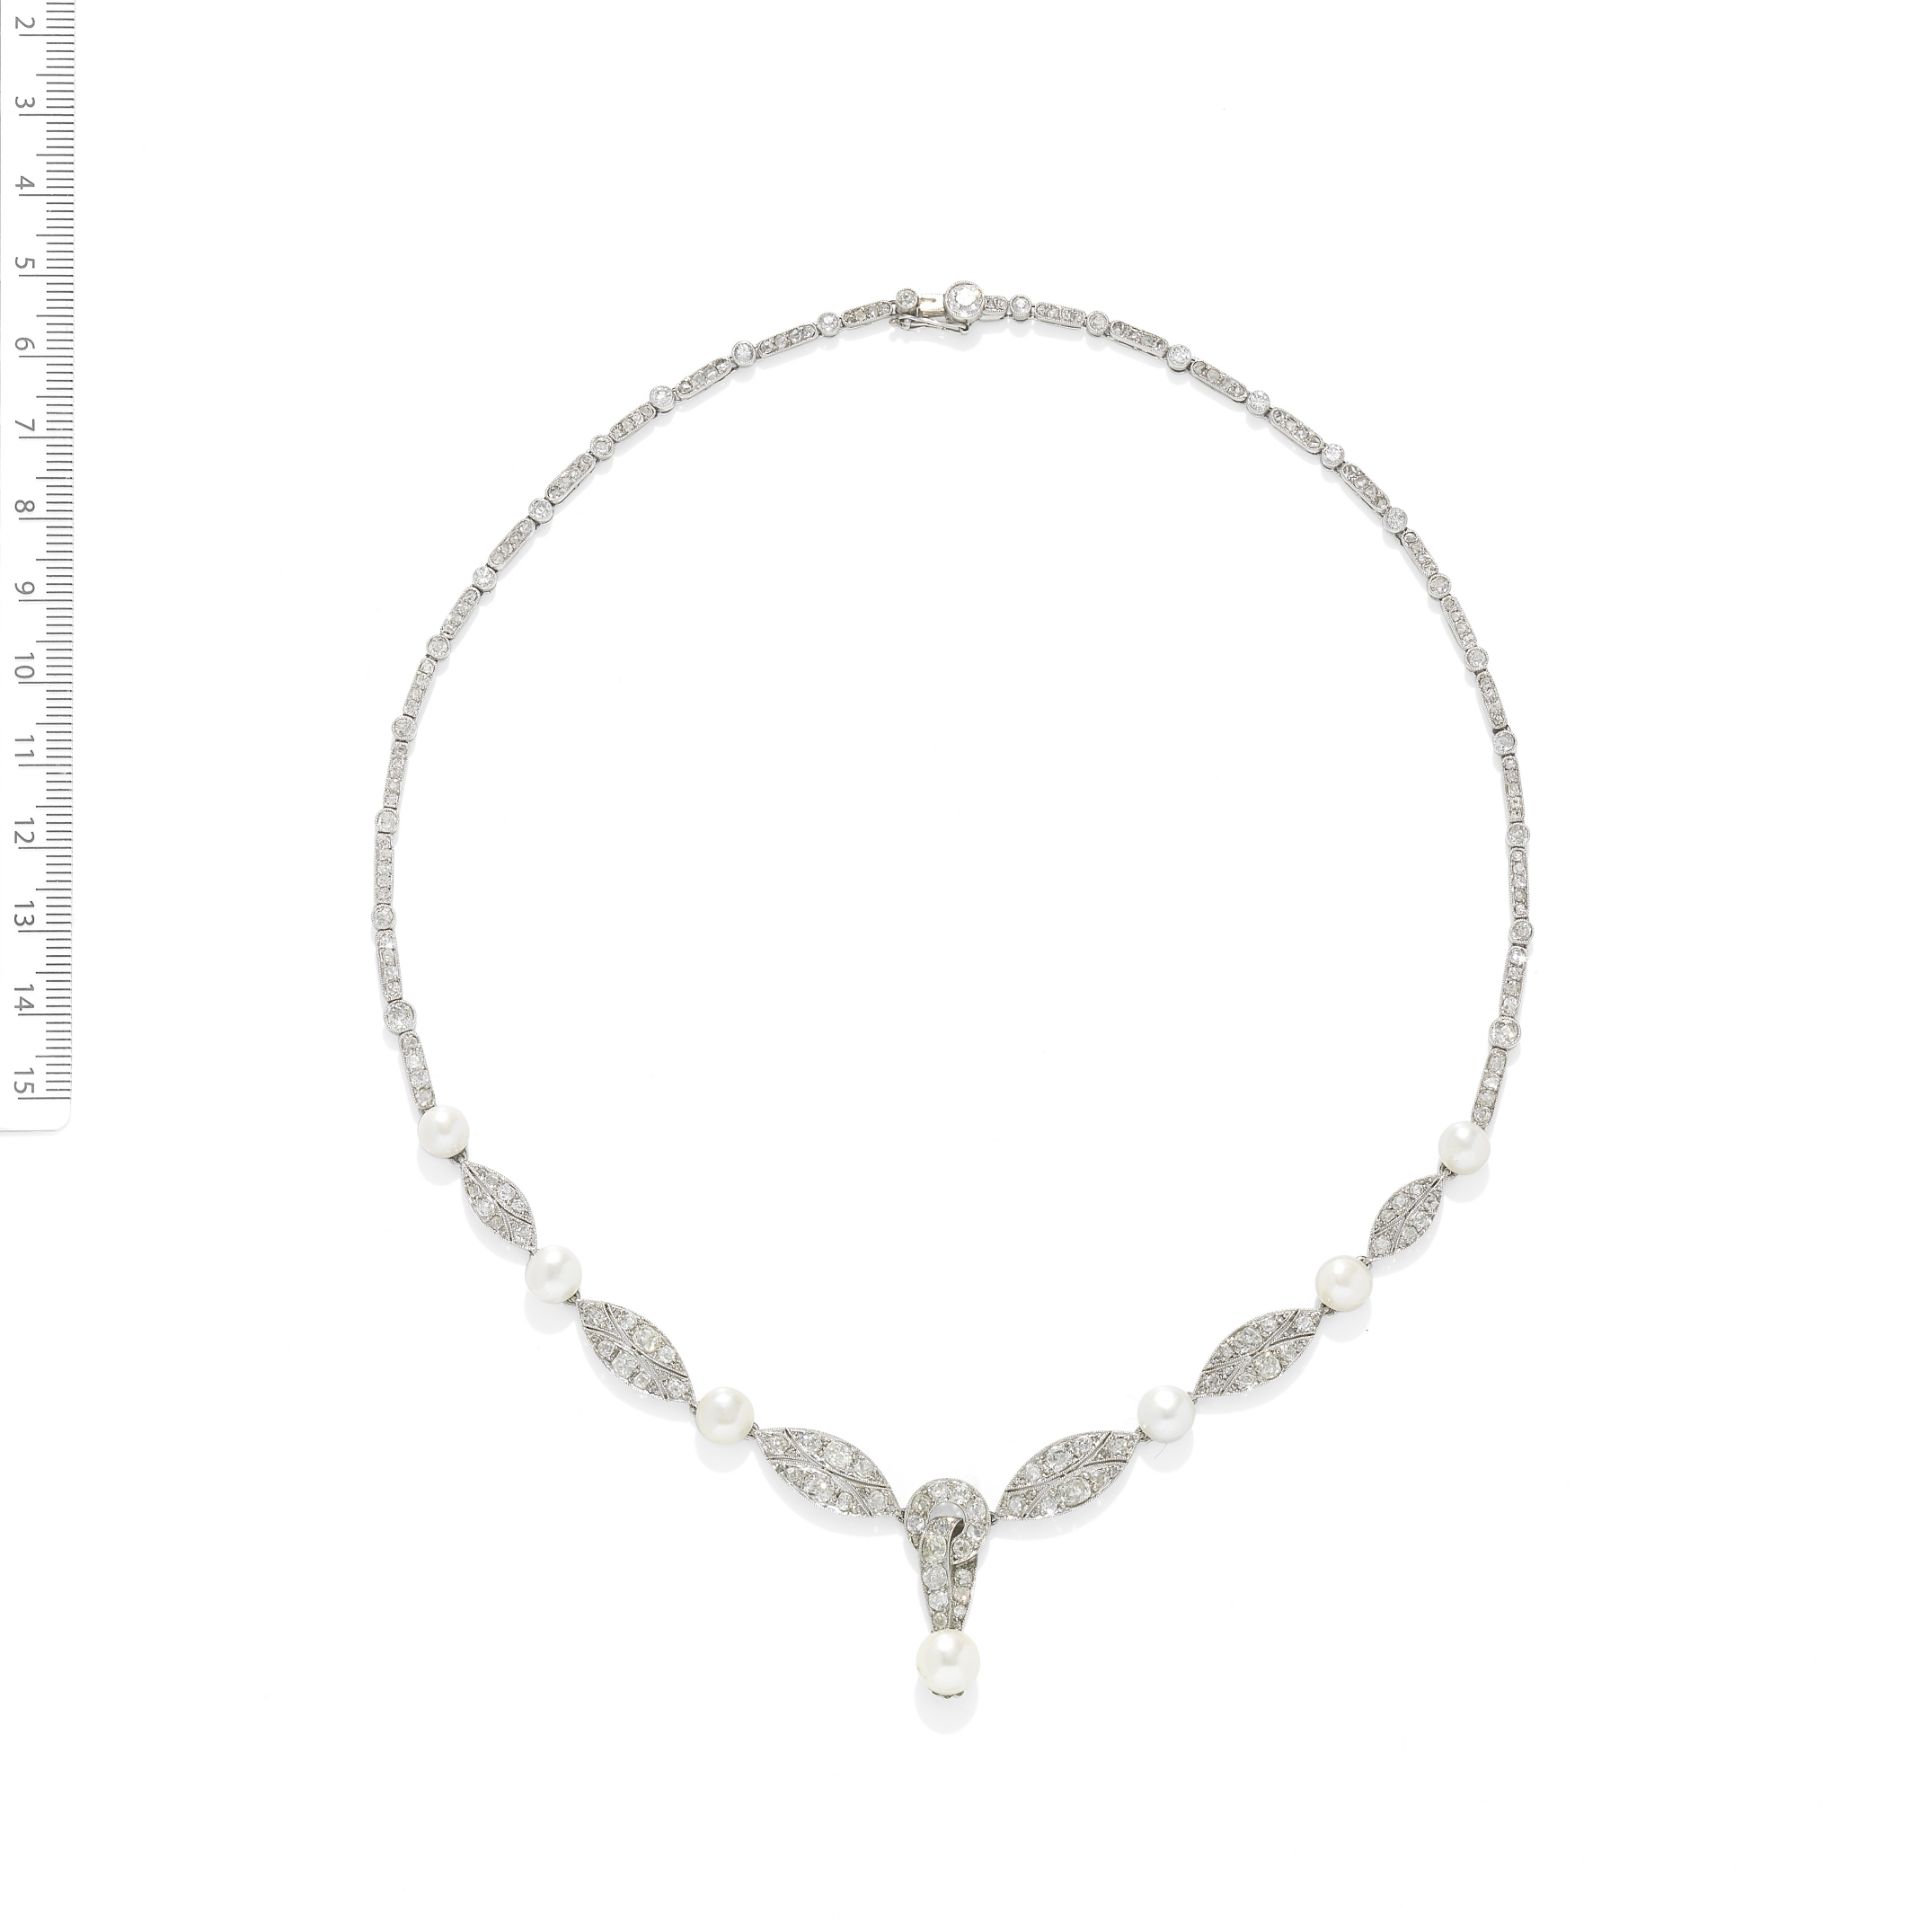 NATURAL PEARL AND DIAMOND NECKLACE, CIRCA 1915 AND LATER